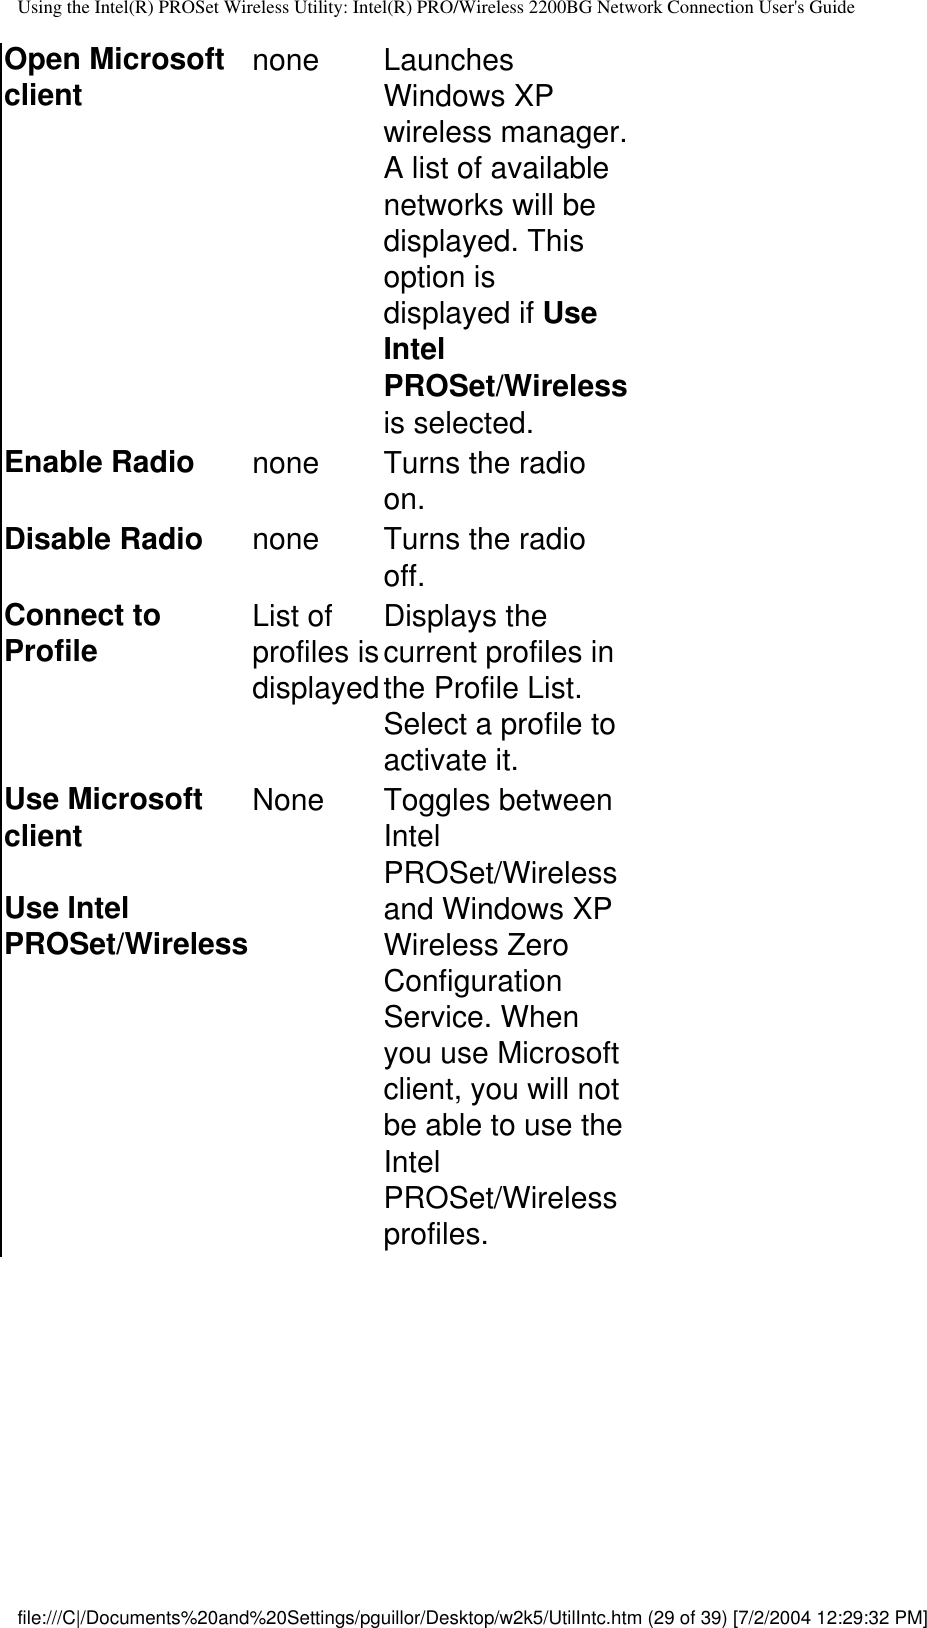 Using the Intel(R) PROSet Wireless Utility: Intel(R) PRO/Wireless 2200BG Network Connection User&apos;s GuideOpen Microsoft client none Launches Windows XP wireless manager. A list of available networks will be displayed. This option is displayed if Use Intel PROSet/Wireless is selected.Enable Radio none Turns the radio on.Disable Radio none Turns the radio off.Connect to Profile List of profiles is displayed   Displays the current profiles in the Profile List. Select a profile to activate it. Use Microsoft client Use Intel PROSet/Wireless None Toggles between Intel PROSet/Wireless and Windows XP Wireless Zero Configuration Service. When you use Microsoft client, you will not be able to use the Intel PROSet/Wireless profiles.file:///C|/Documents%20and%20Settings/pguillor/Desktop/w2k5/UtilIntc.htm (29 of 39) [7/2/2004 12:29:32 PM]